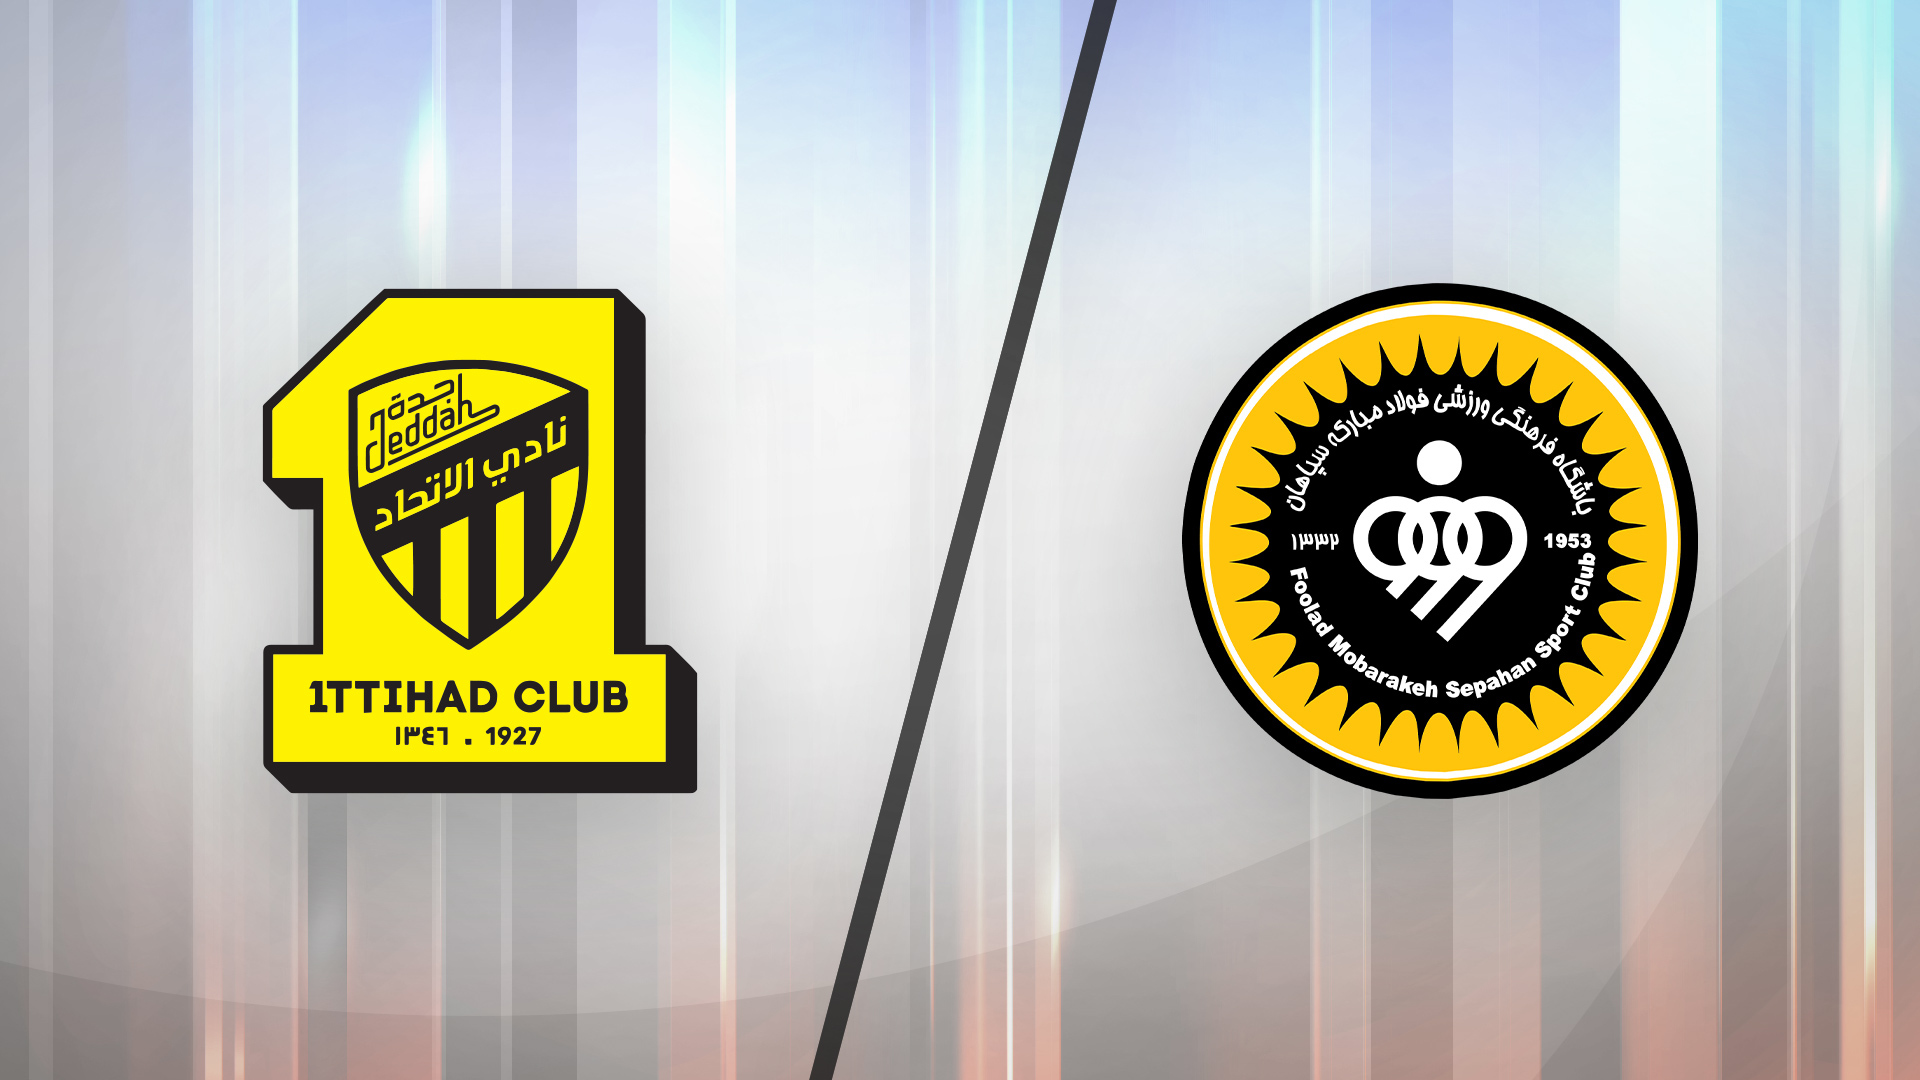 AFC] The AFC Champions League™ 2023/24 Group C match between Sepahan FC and  Al Ittihad FC, which was scheduled to take place at the Naghsh-e-Jahan  Stadium in Isfahan tonight, has been cancelled